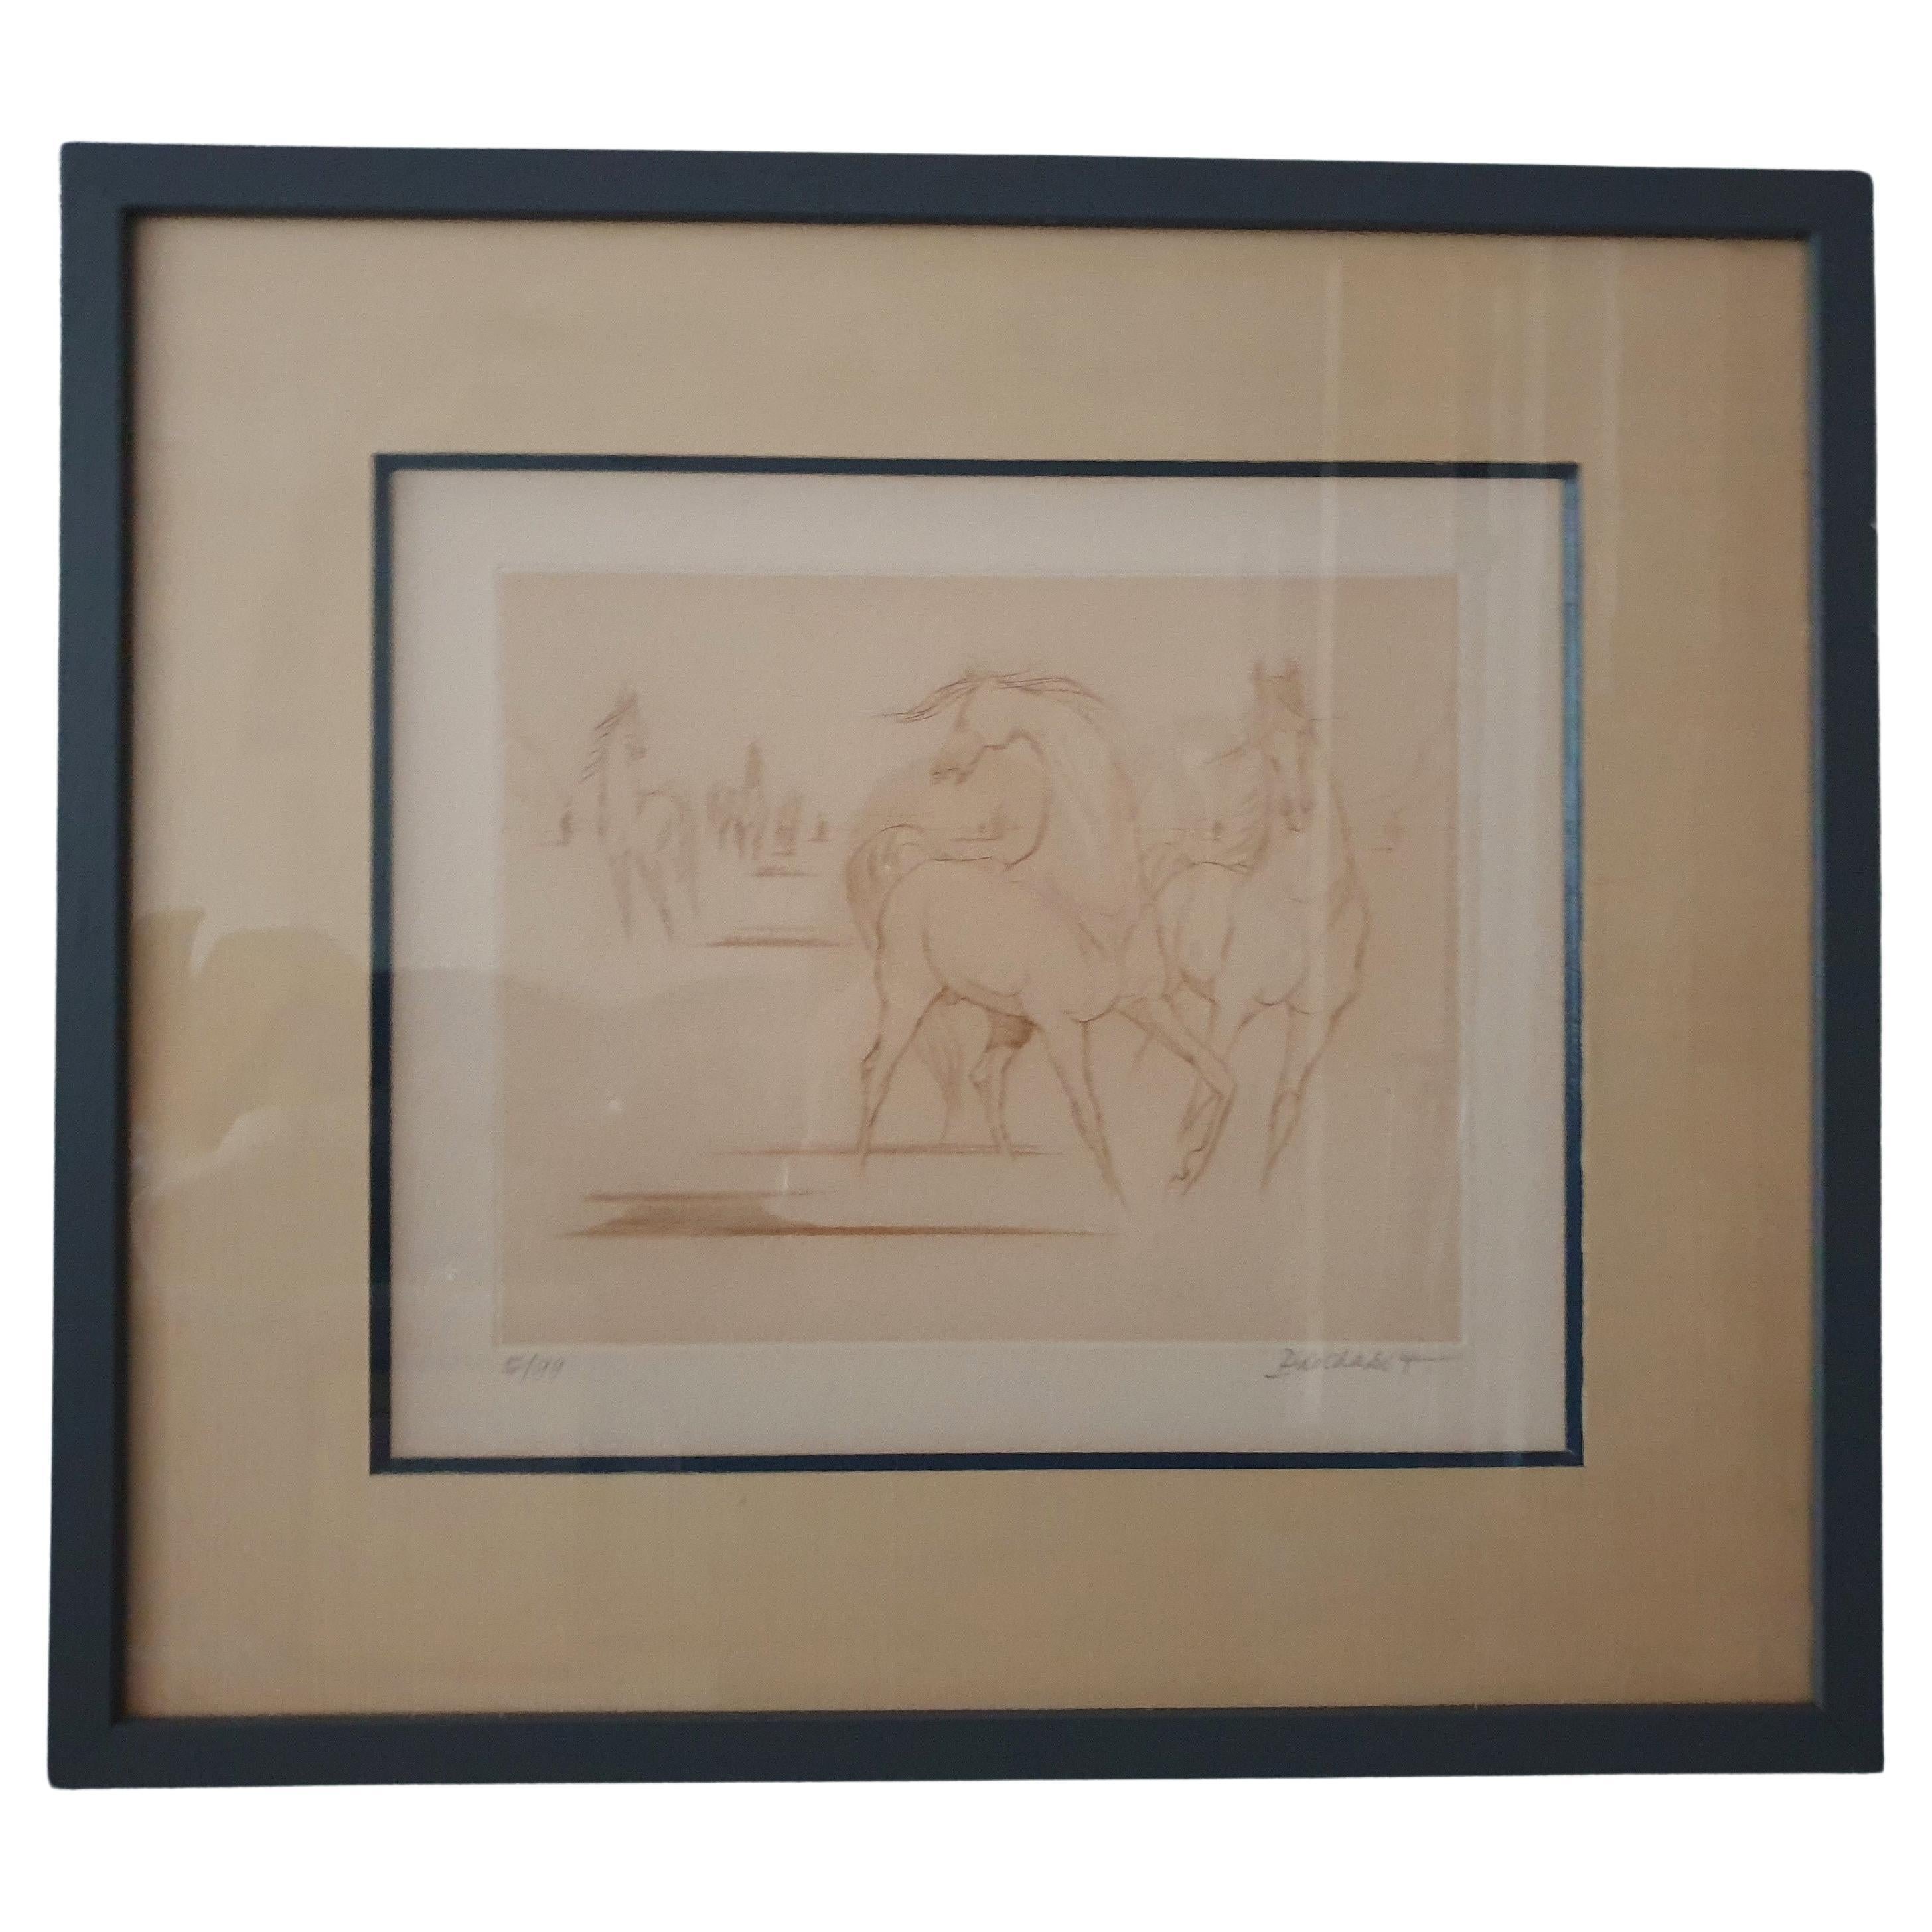 Etching with Acquatint, signed and numbered by Paul de Chabot.